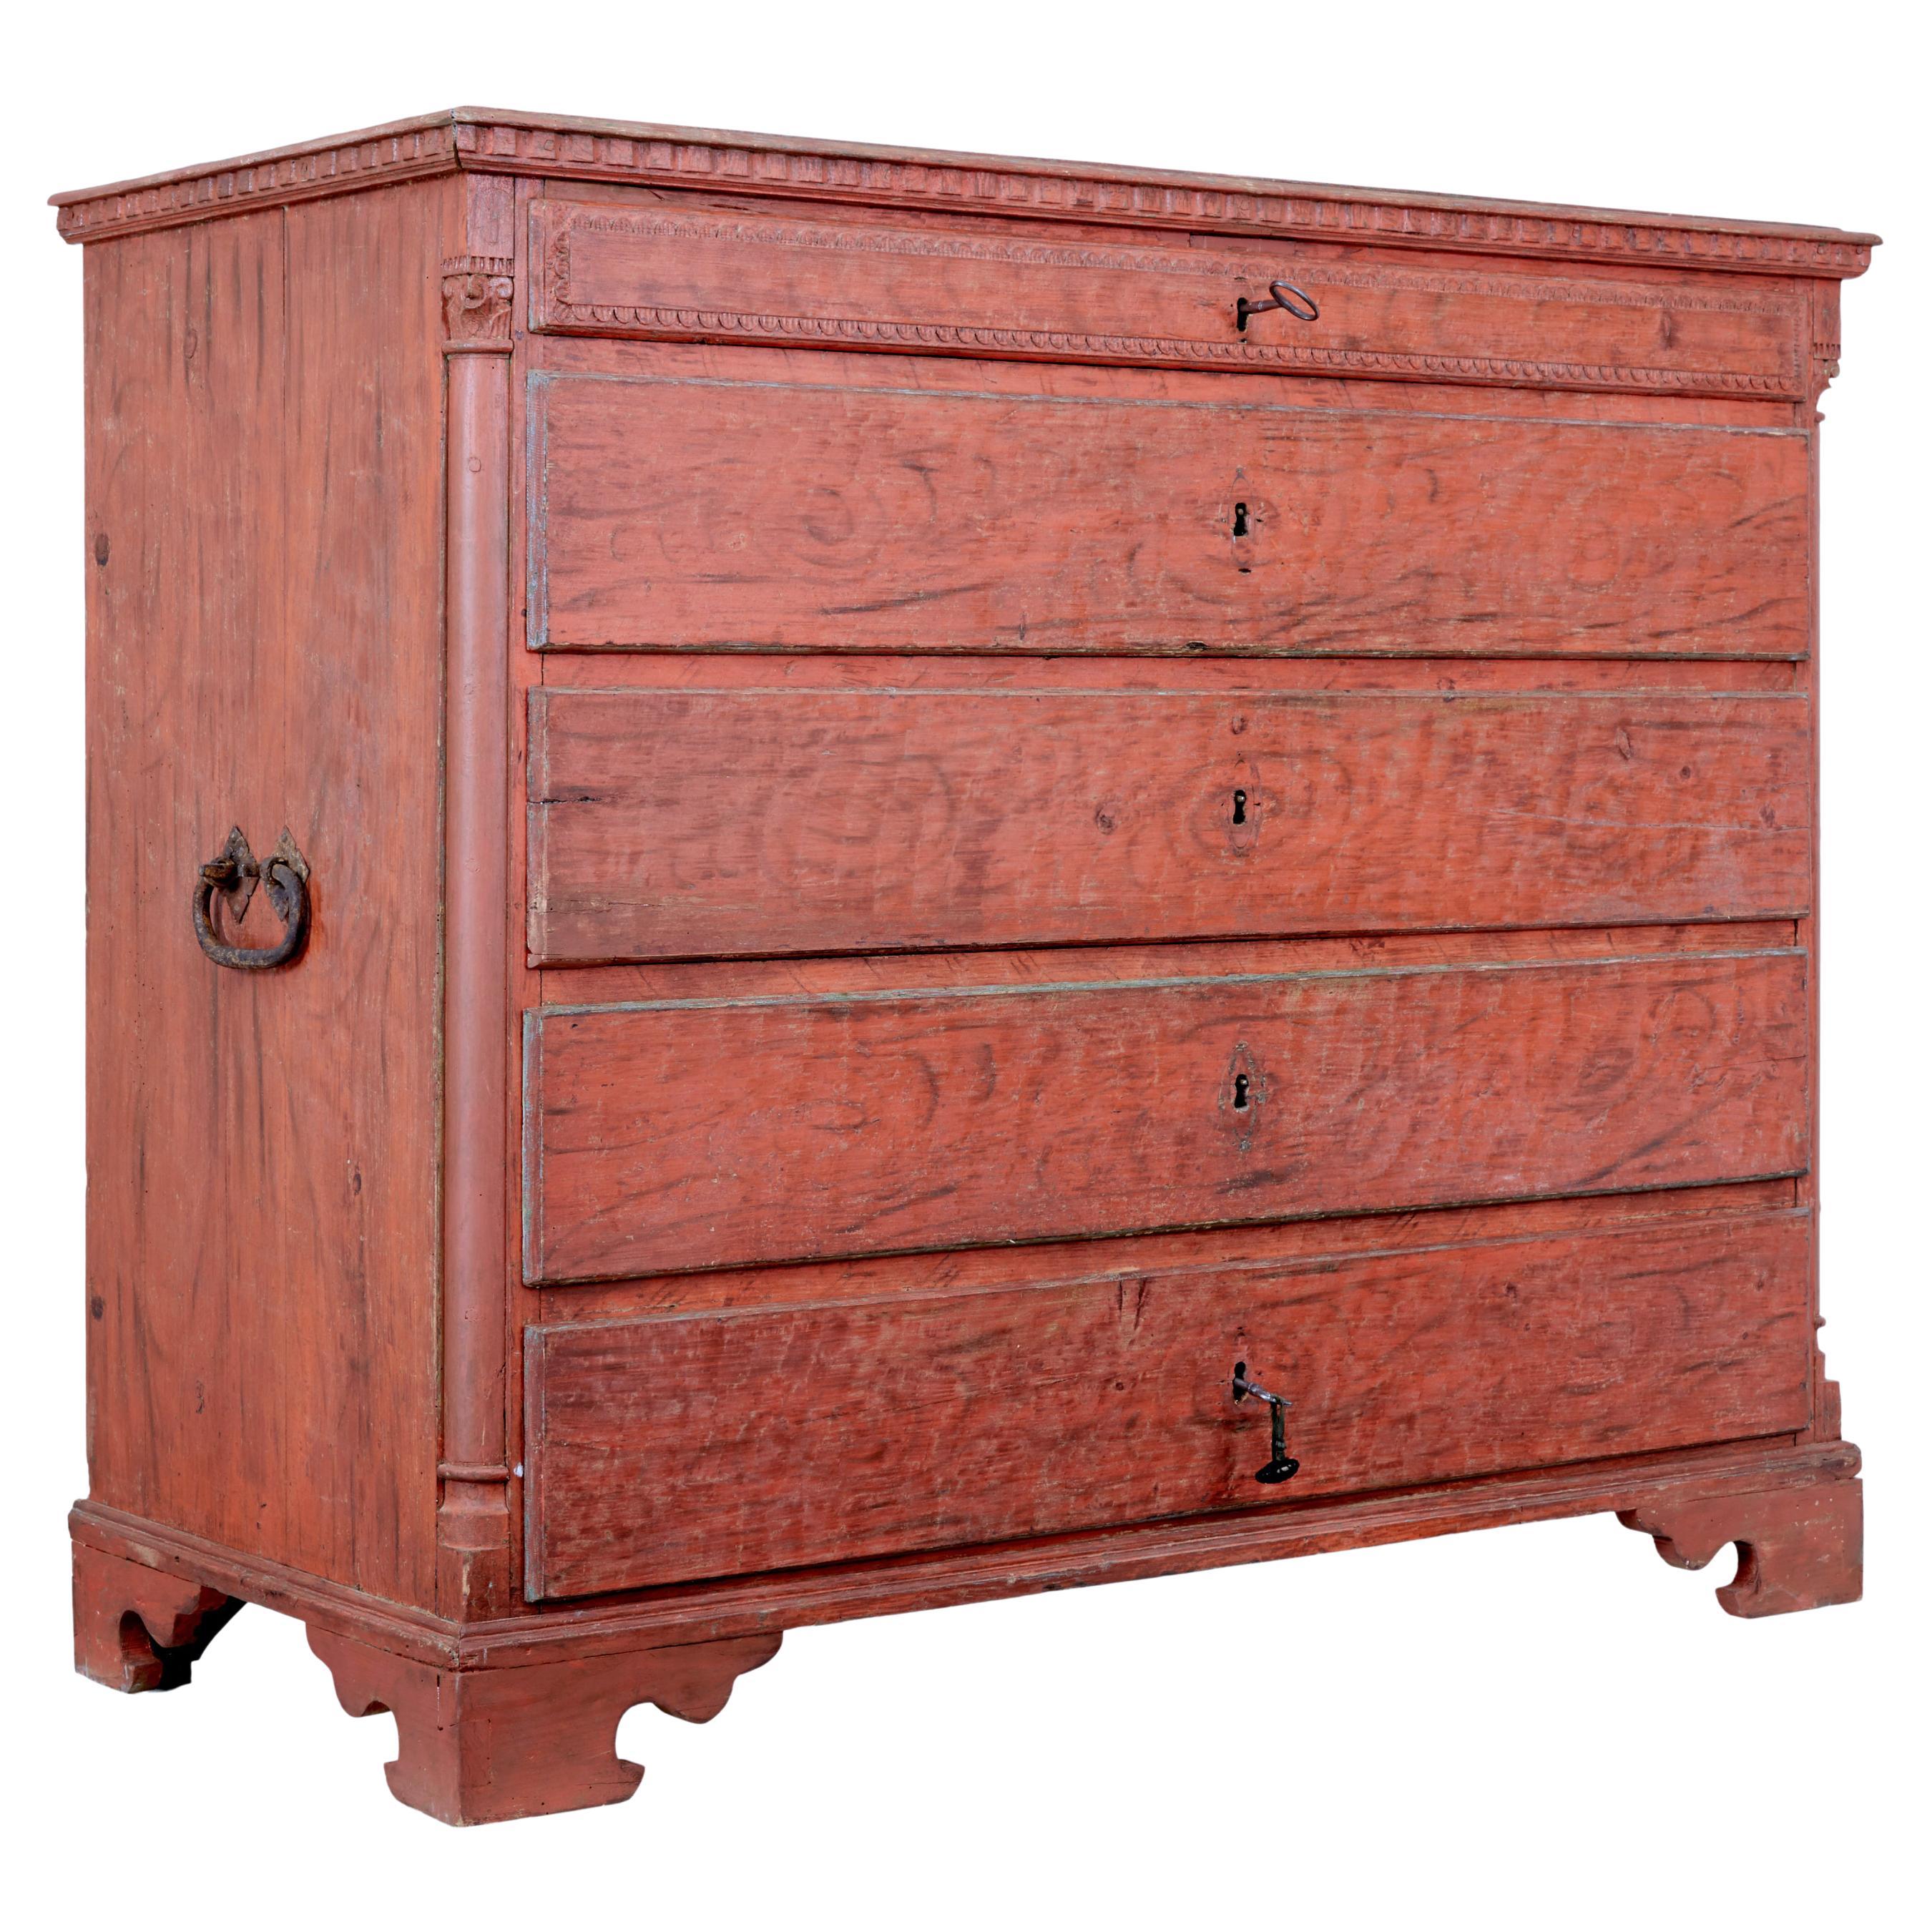 Late 18th Century Swedish Gustavian Painted Chest of Drawers